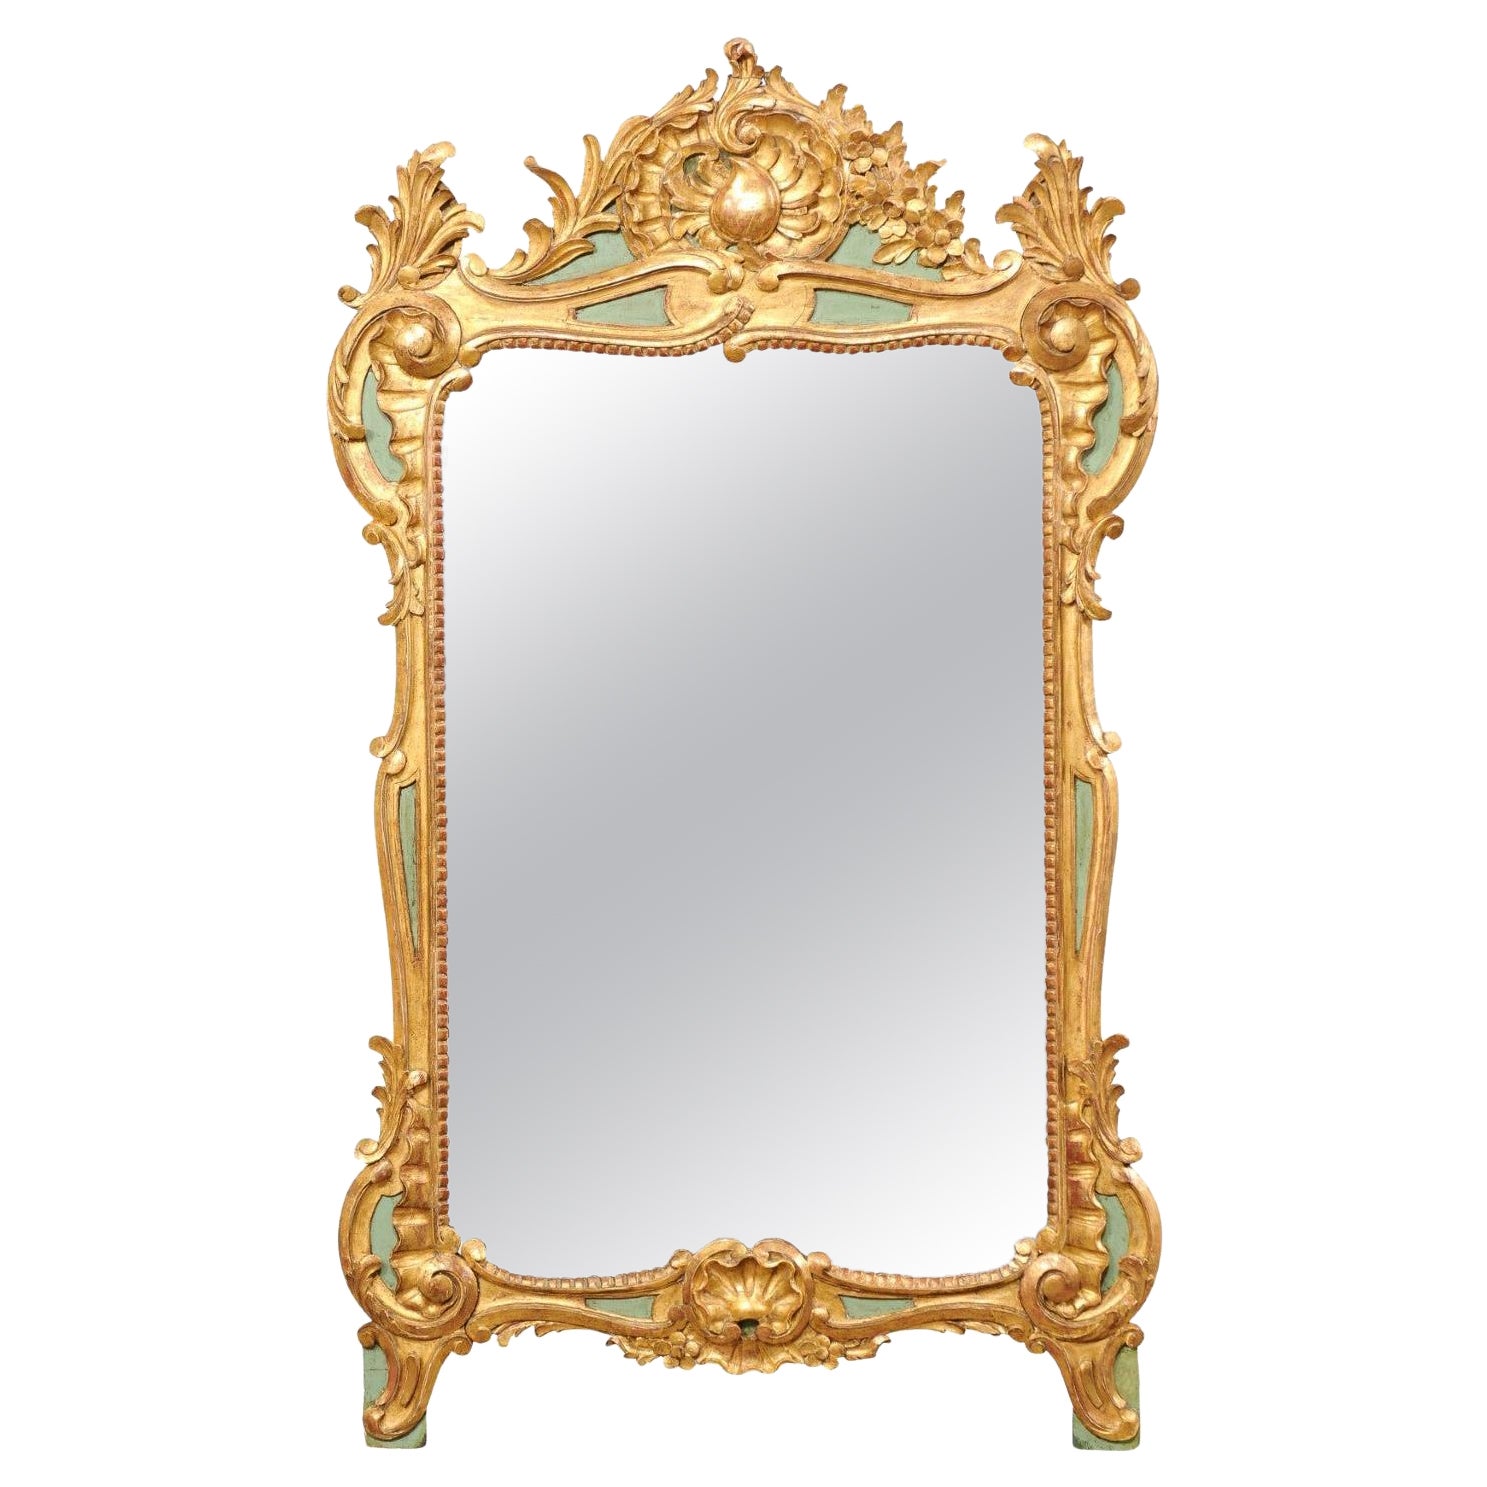 French Rococo Style Carved and Gilt Mirror, Early 20th C.